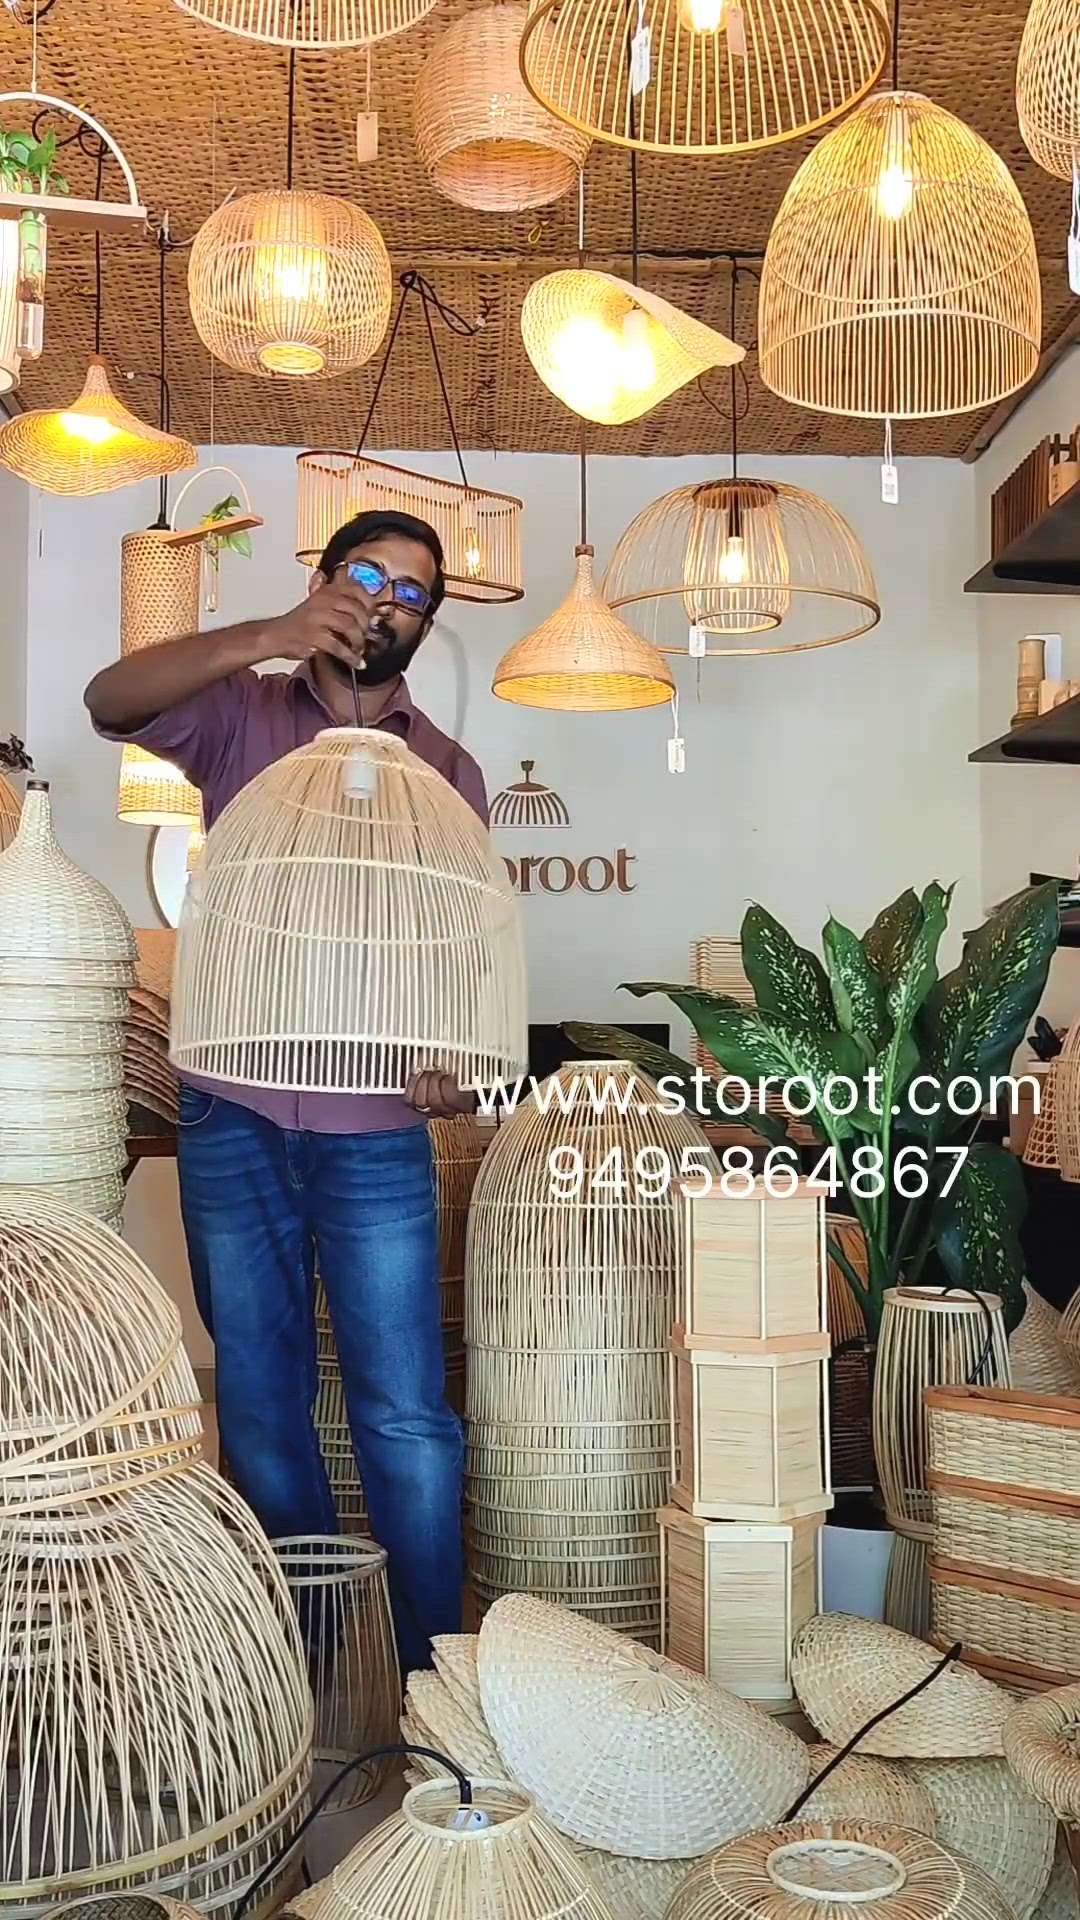 interior lights and decor collection using bamboo and other natural materials  #bamboolights #bamboodesign #handmade #interiorlighting #project #modernminimalism #HomeDecor #sustainableliving #sustainabledesign #sustainablearchitecture